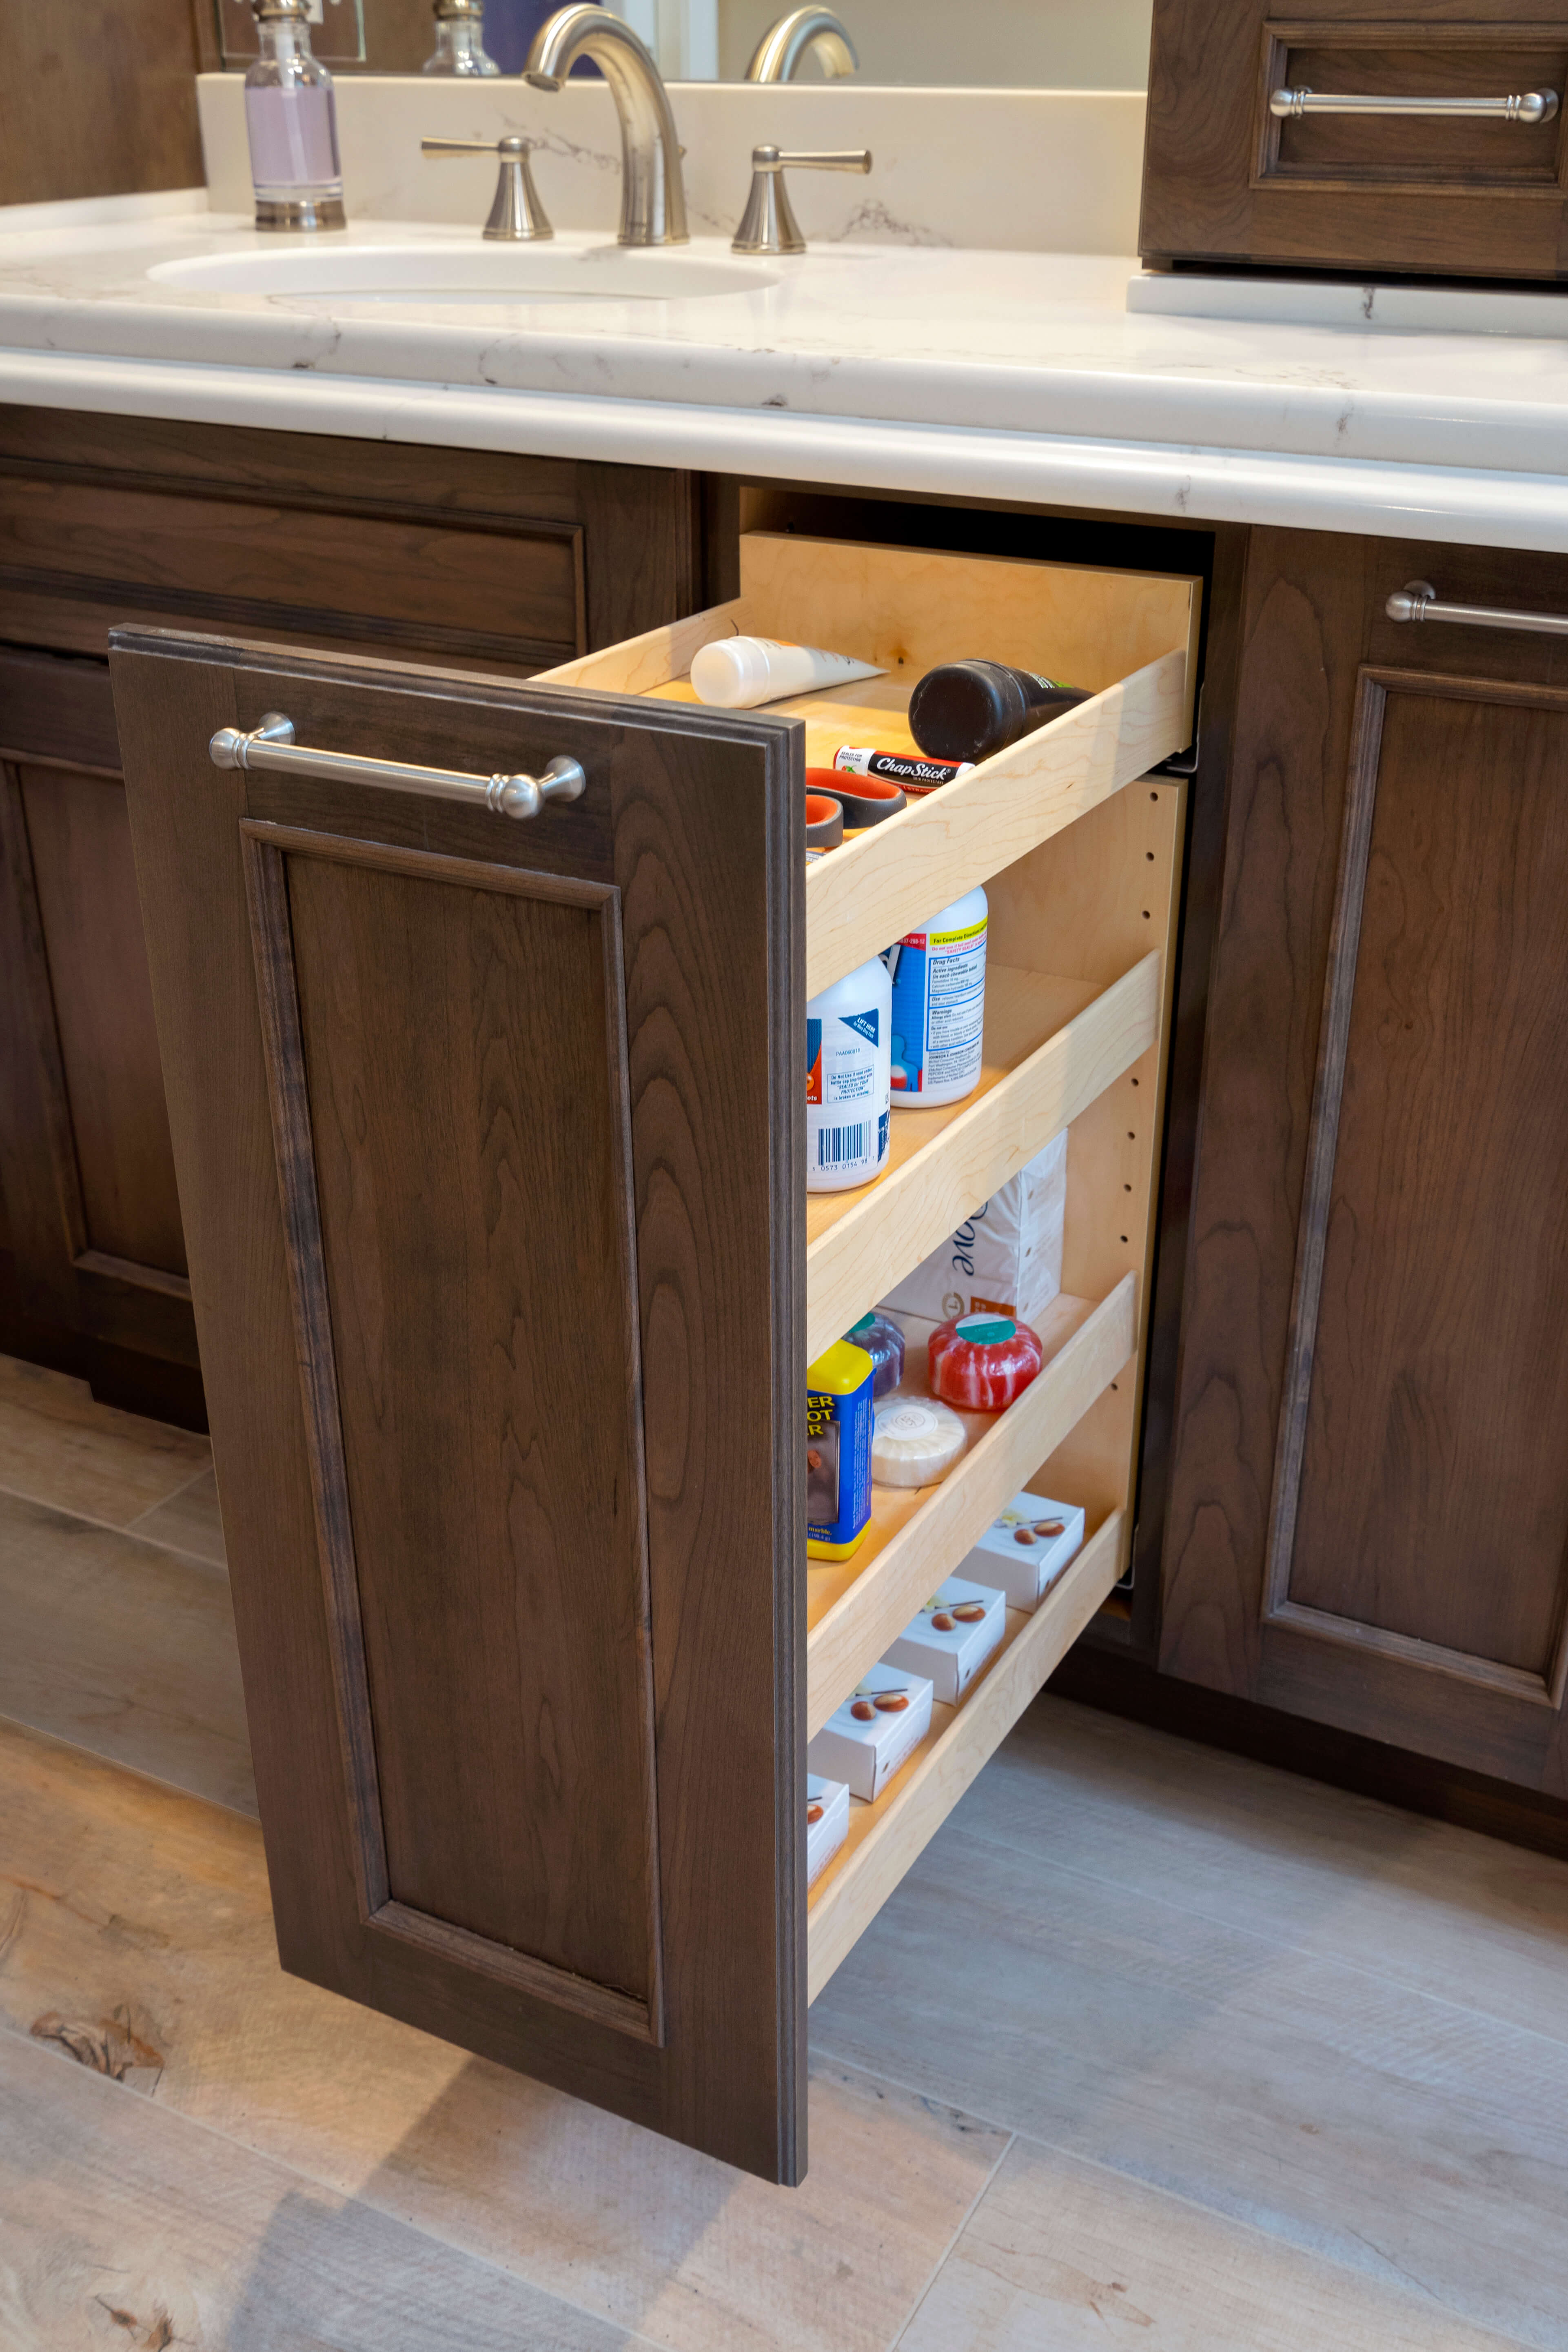 Vanity Pull-Out Storage Bathroom Cabinet Accessory by Dura Supreme Cabinetry.